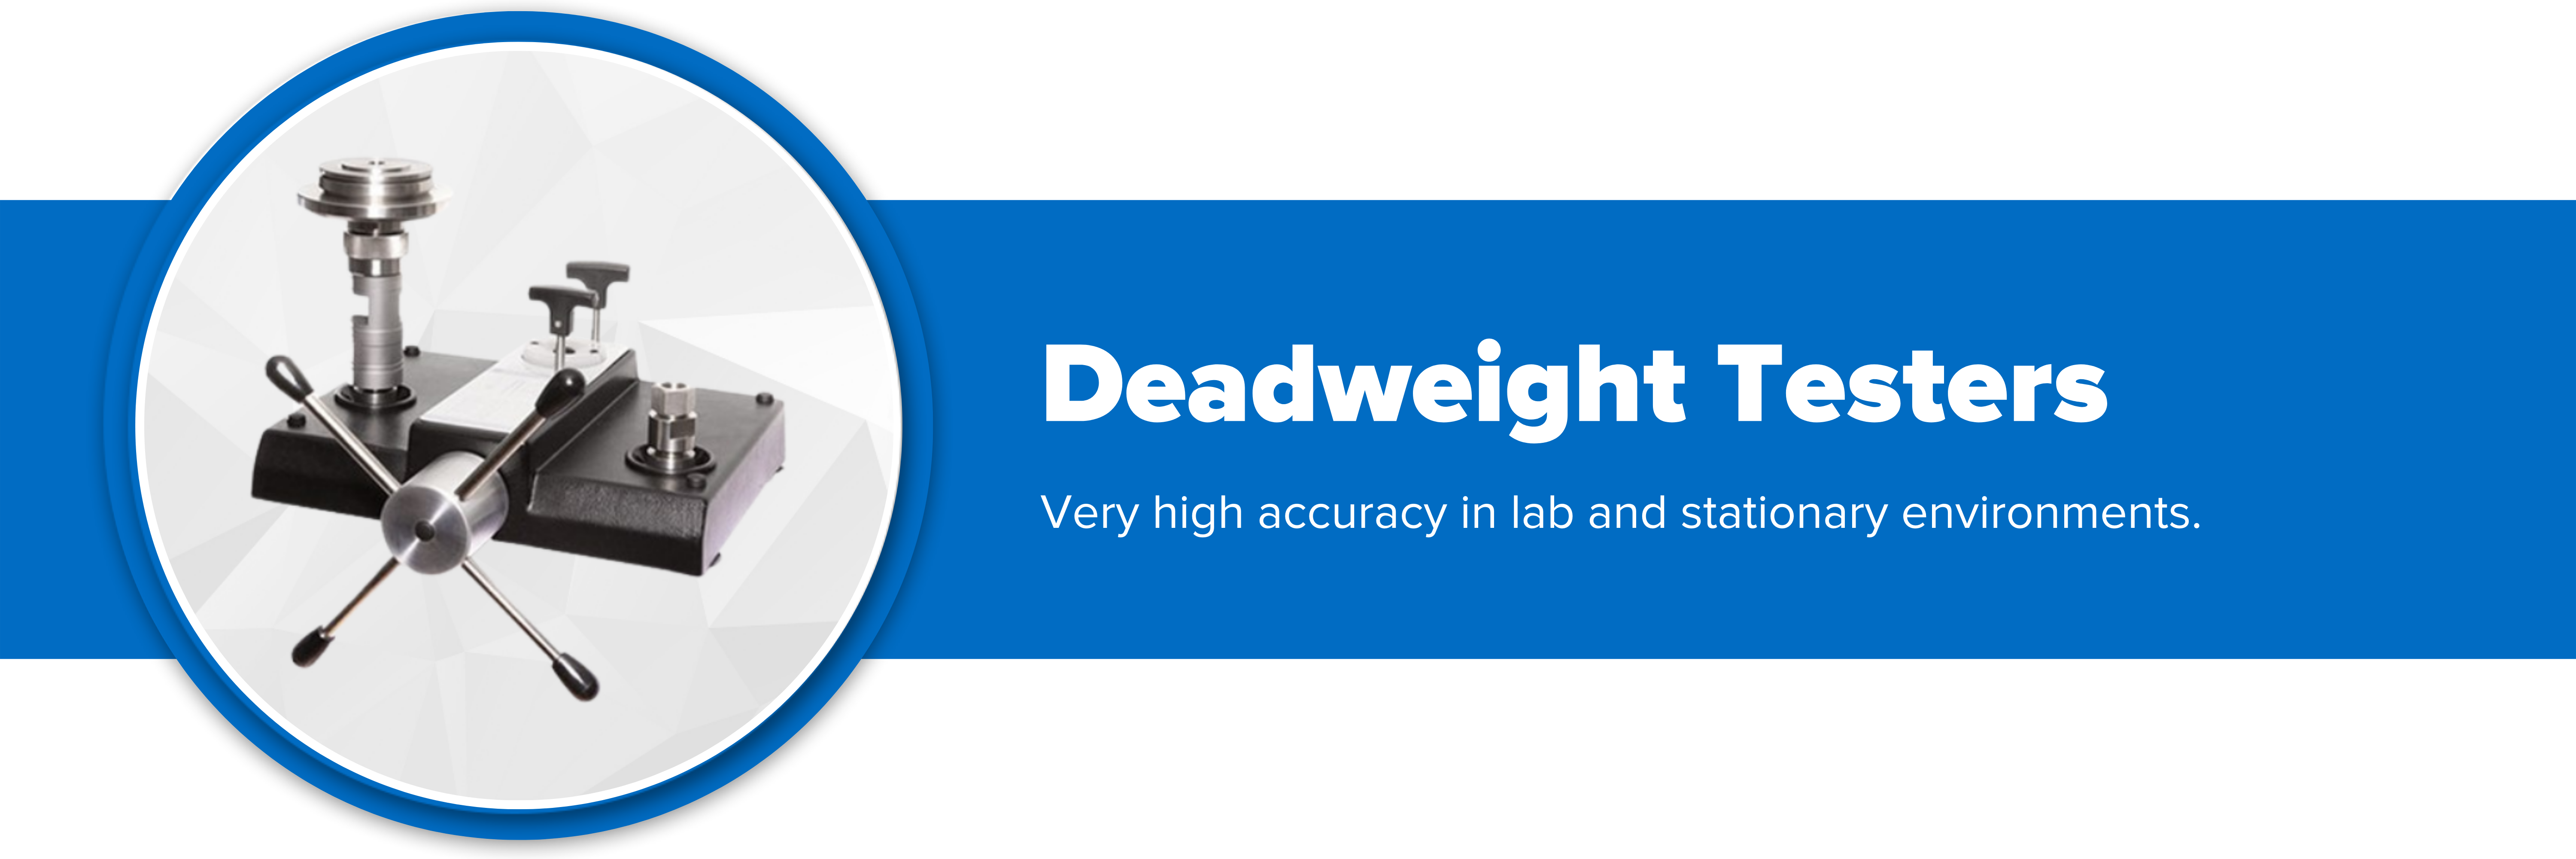 Header image with text "Deadweight Testers"